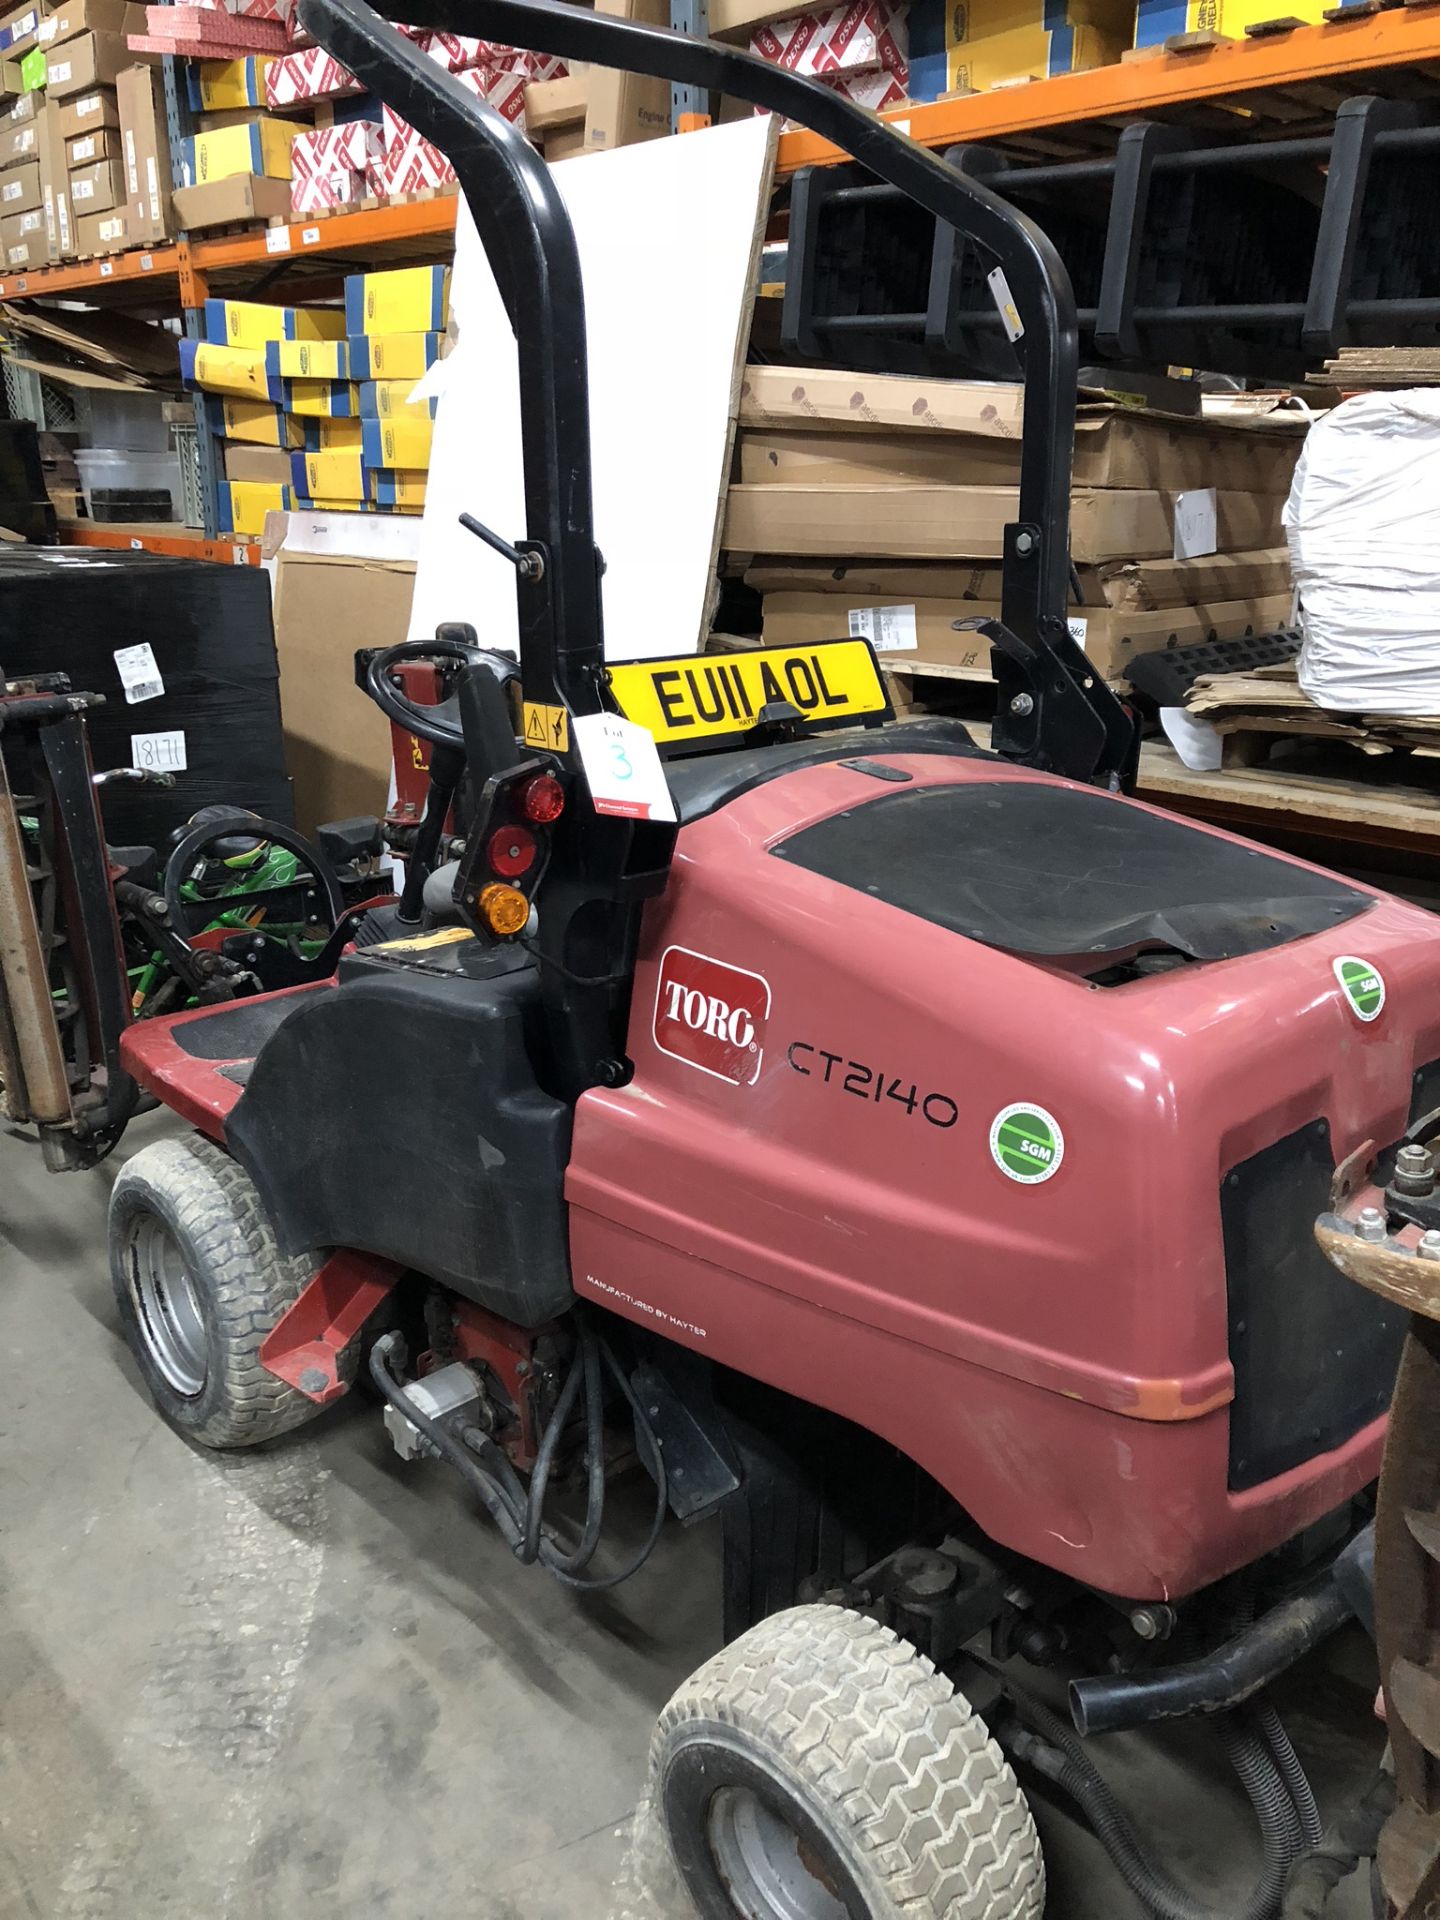 Toro CT2140 Ride-On Mower - EU11 AOL - With 3 x Cutting Blades | Hours: 3363.0 - Image 2 of 5